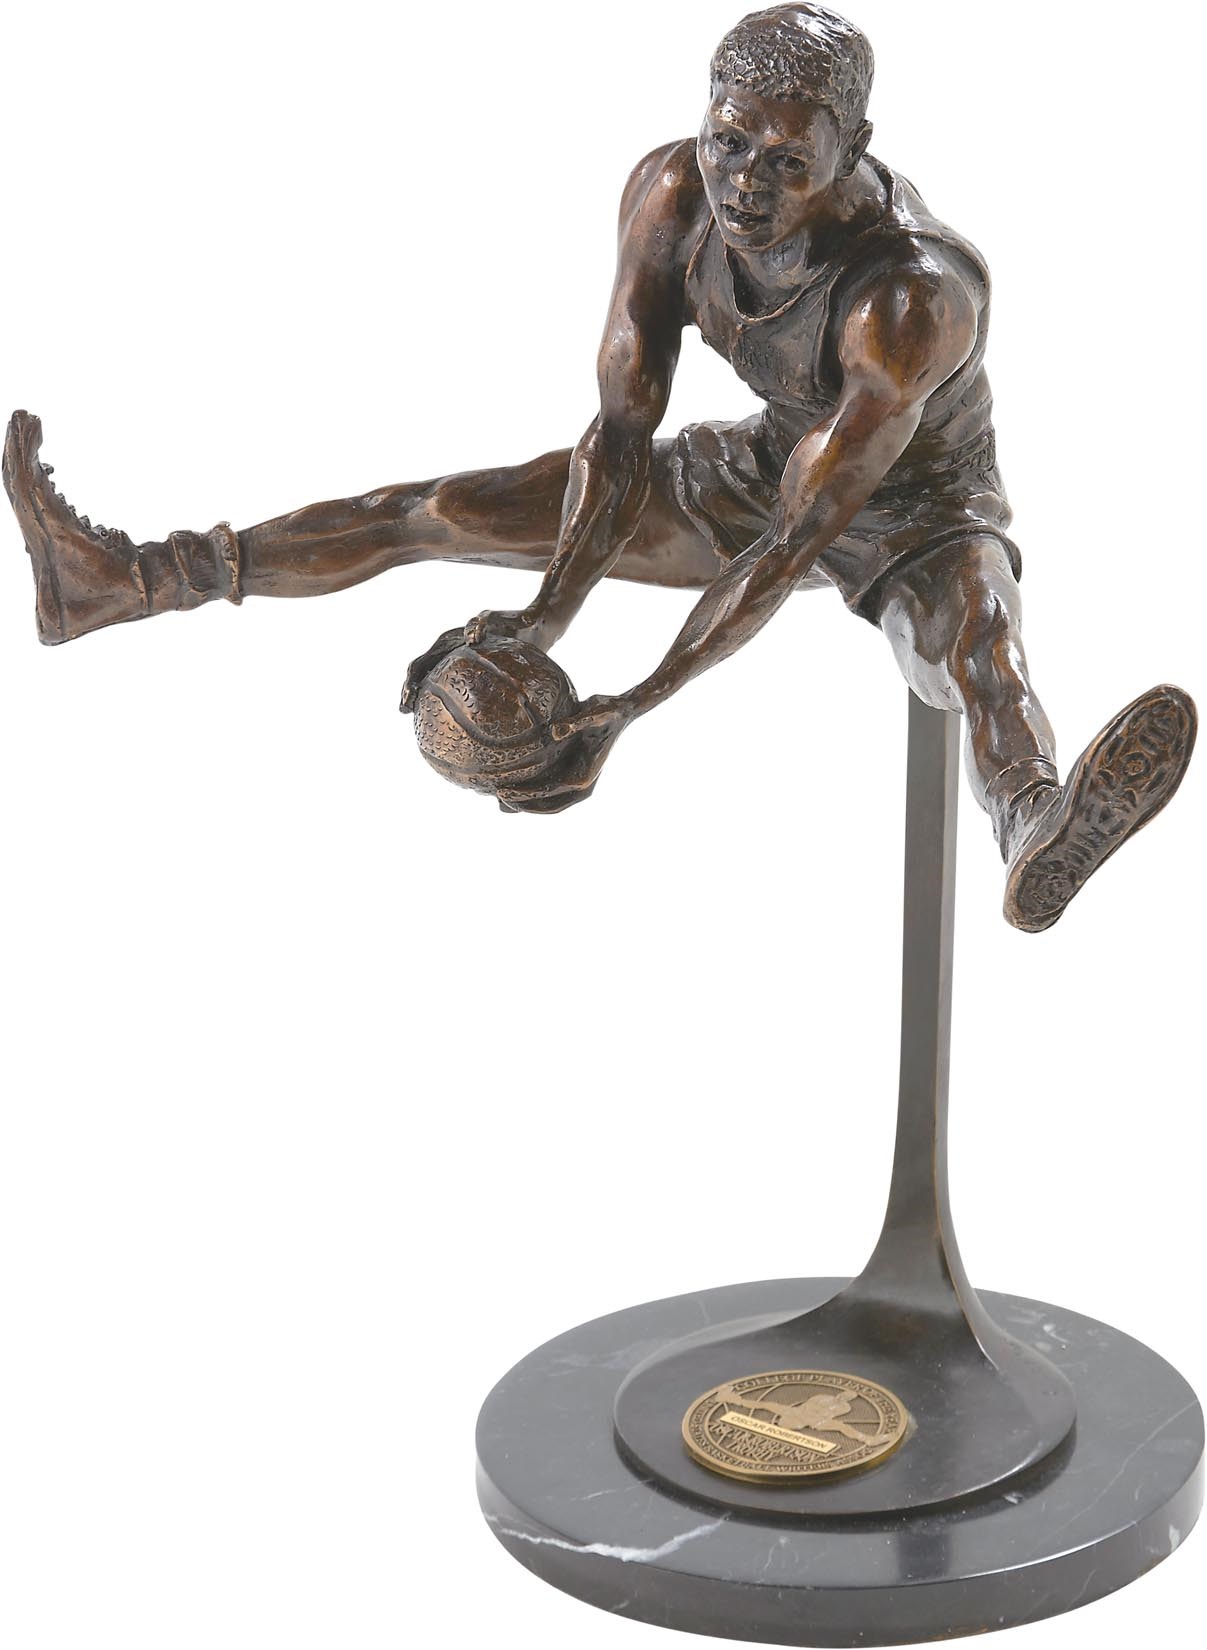 Oscar Robertson College Player of the Year Trophy Presented to Oscar Robertson